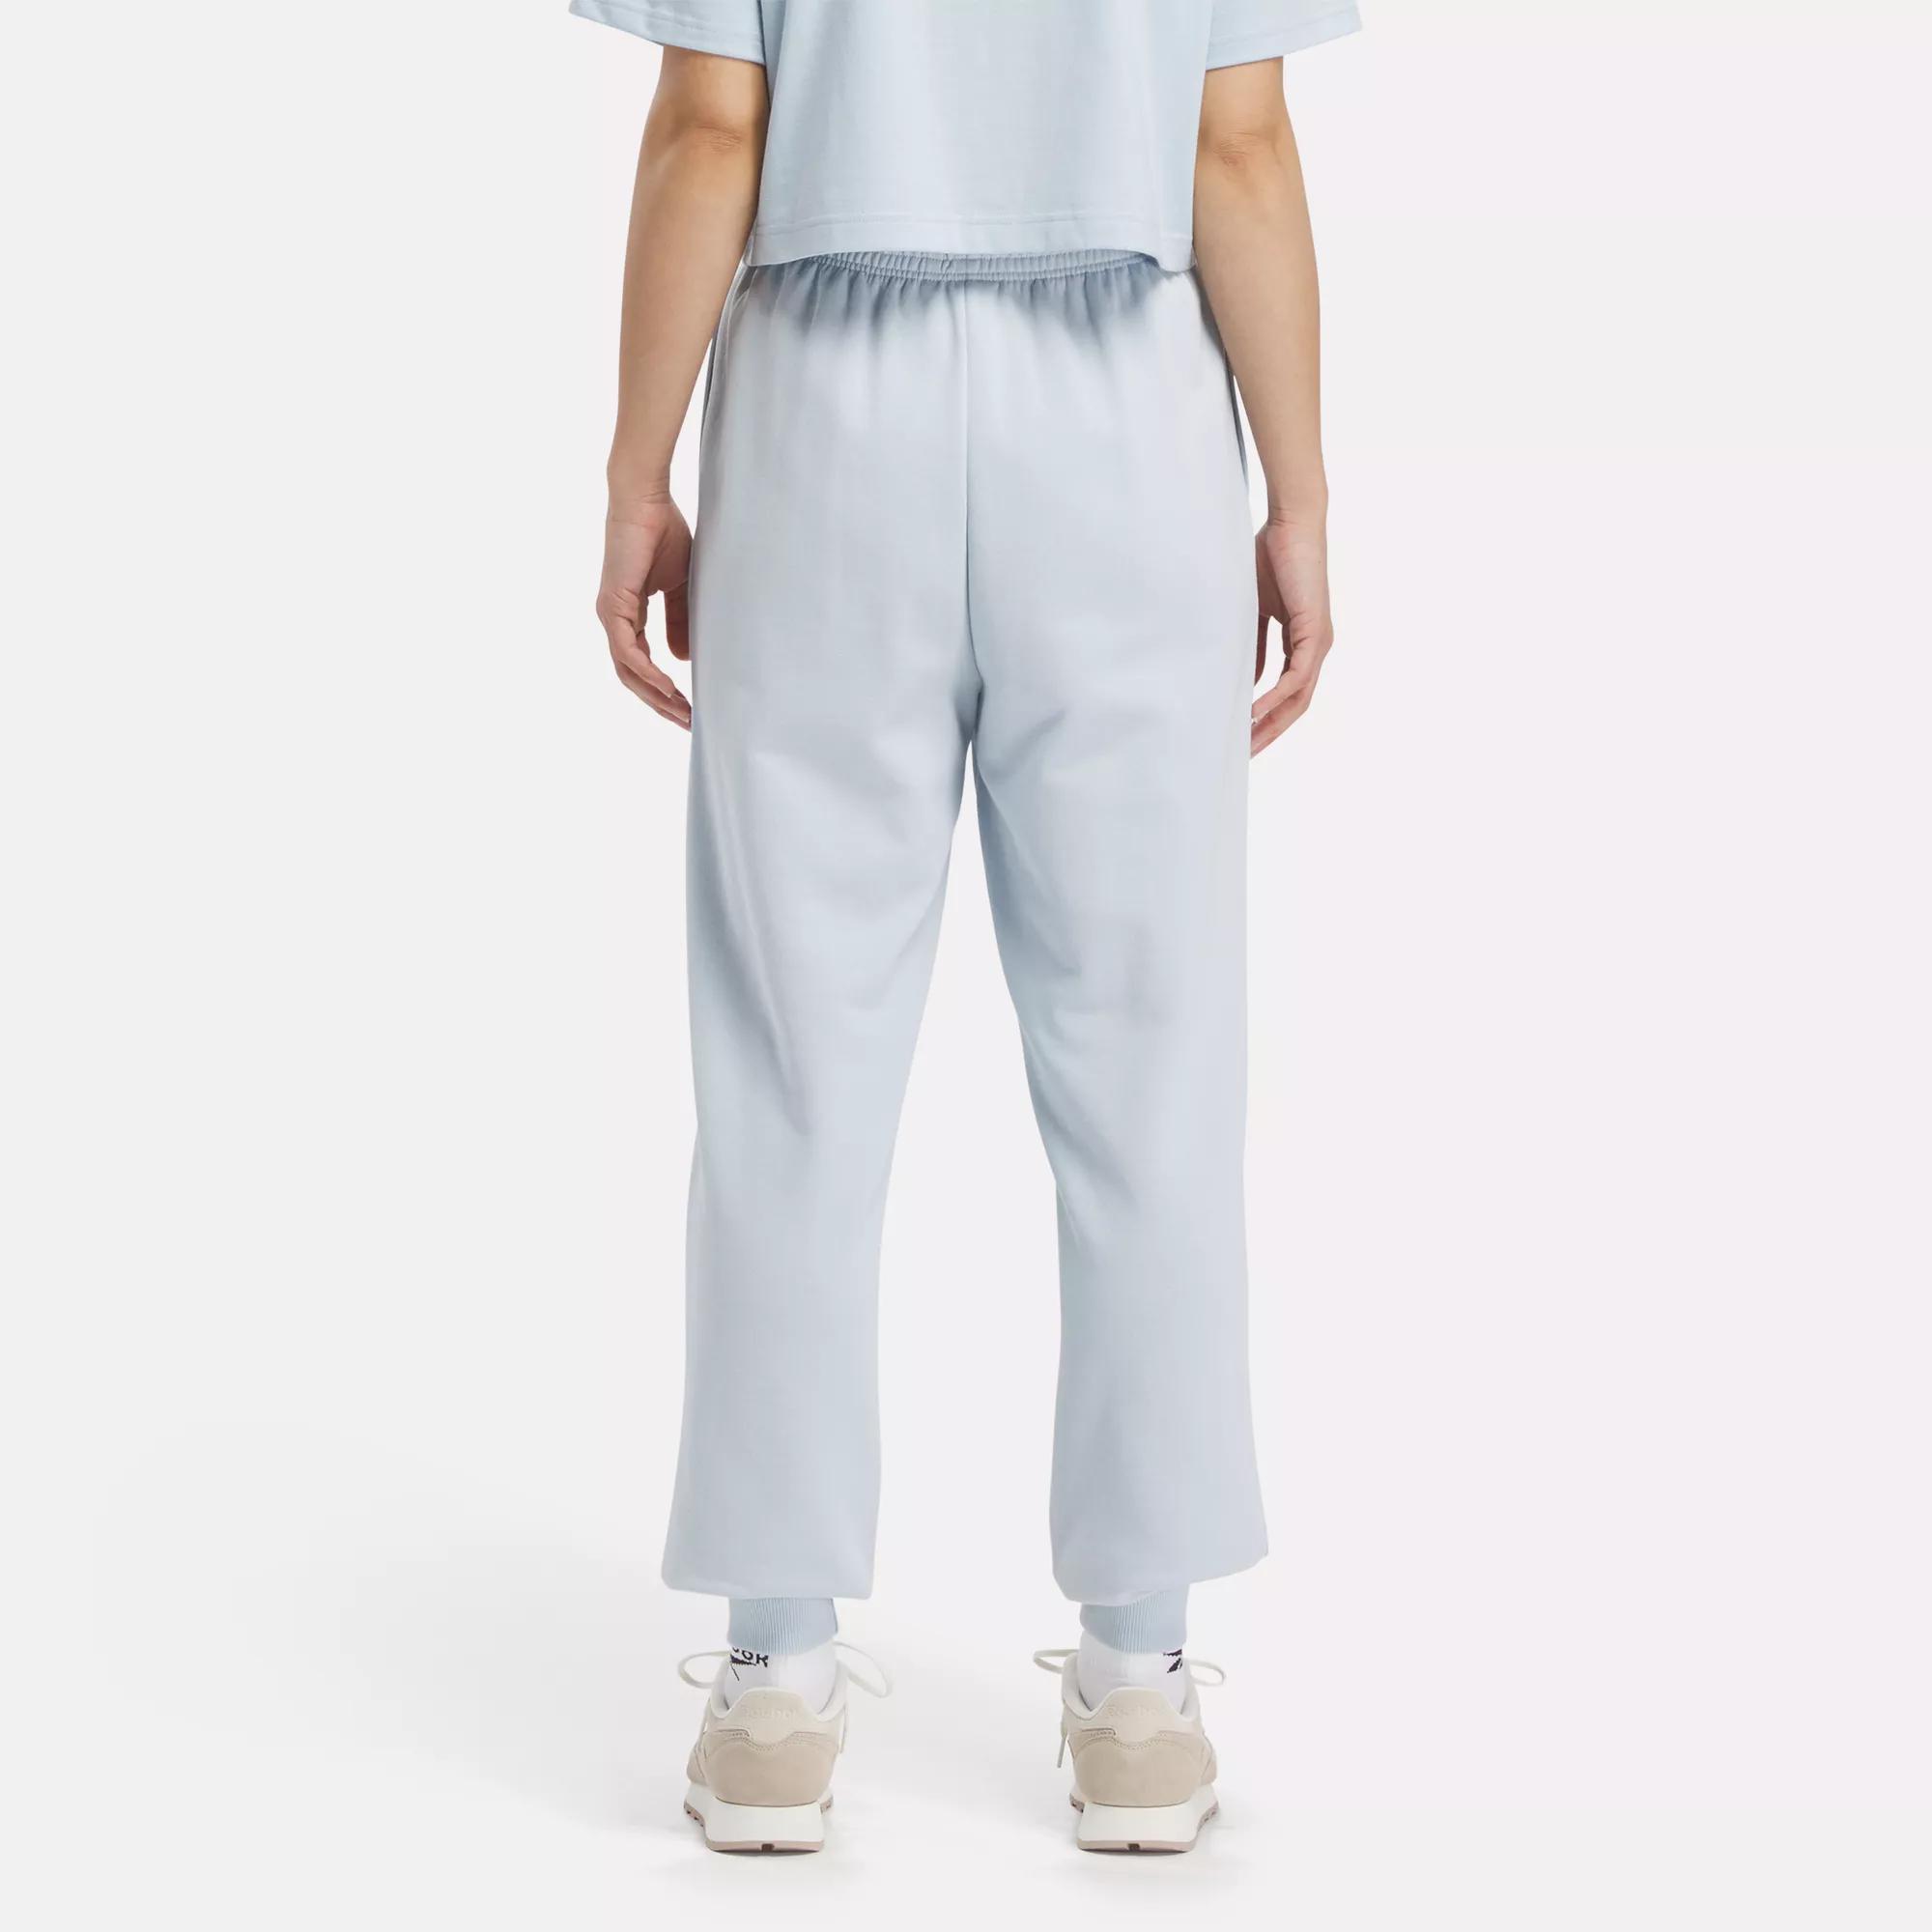 Classics Archive Essentials Fit French Terry Pants - Feel Good Blue | Reebok